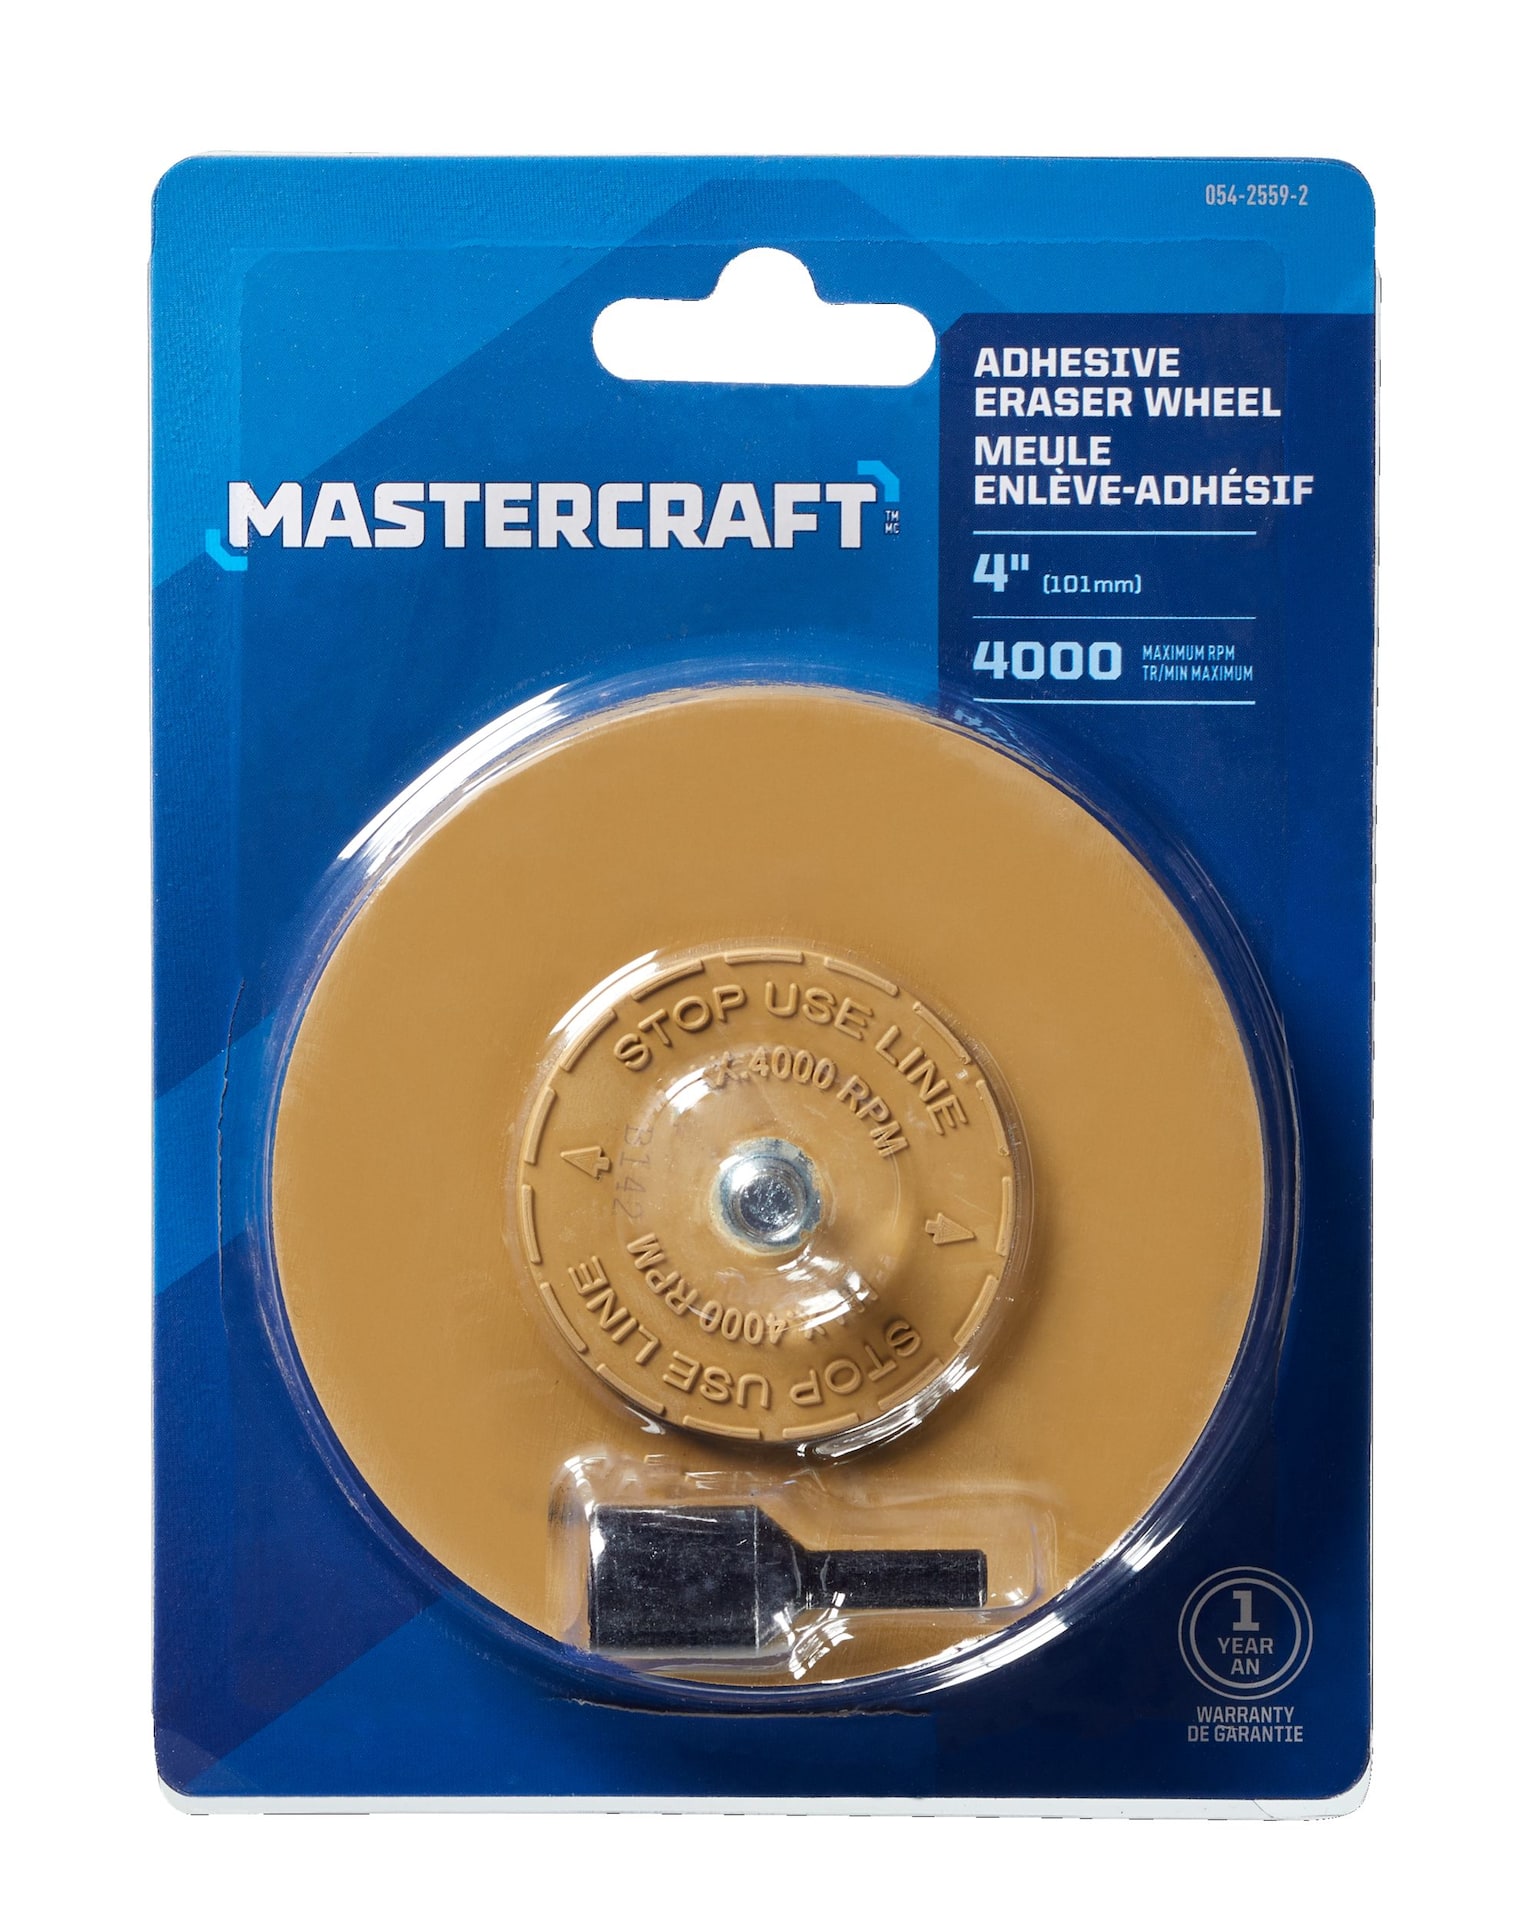 https://media-www.canadiantire.ca/product/fixing/tools/power-tool-accessories/0542559/mastercraft-rubber-adhesive-eraser-wheel-cb021110-6cbb-416d-858a-13ac12c9ba57-jpgrendition.jpg